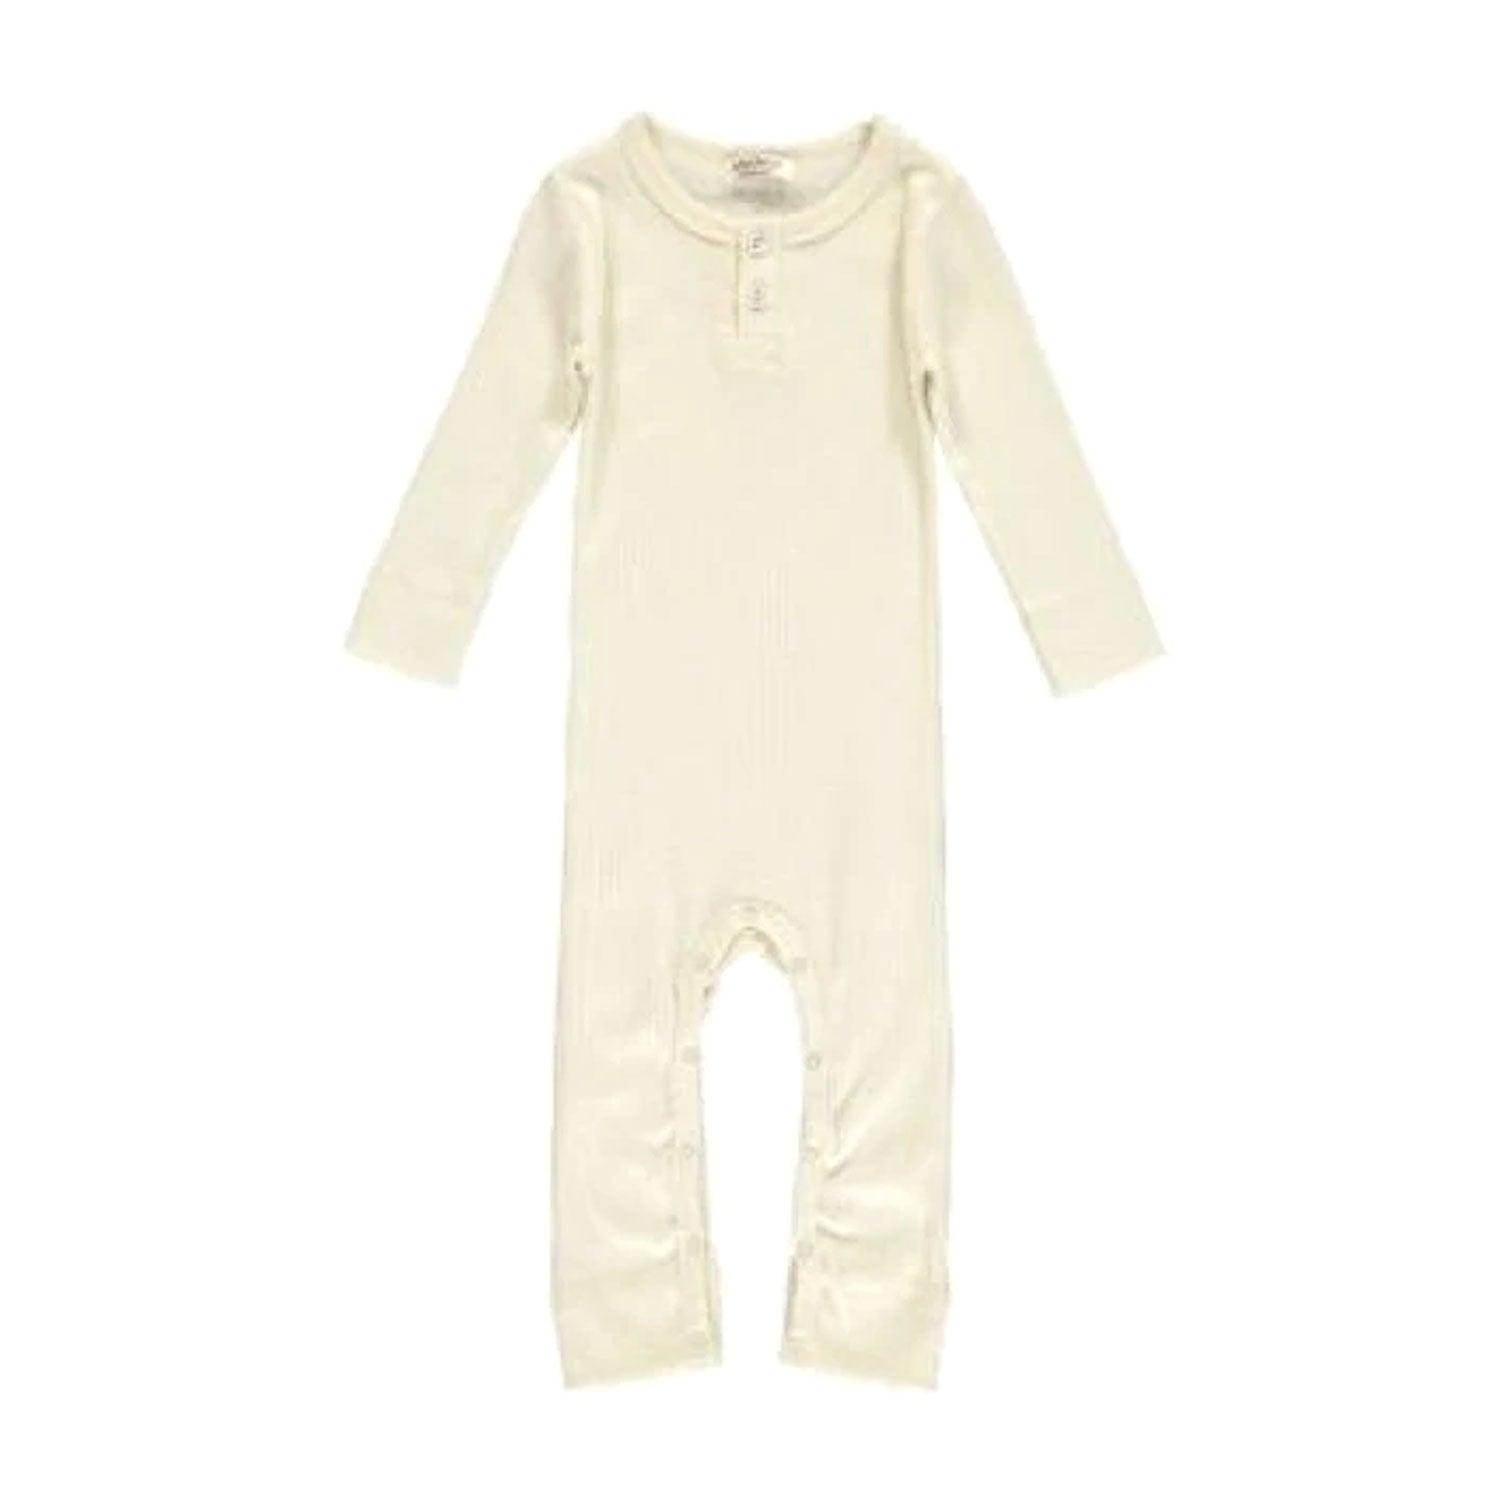 An image of Baby Jumpsuit - All in One Bodysuit | MarMar Copenhagen Off White / 1Y/80cm